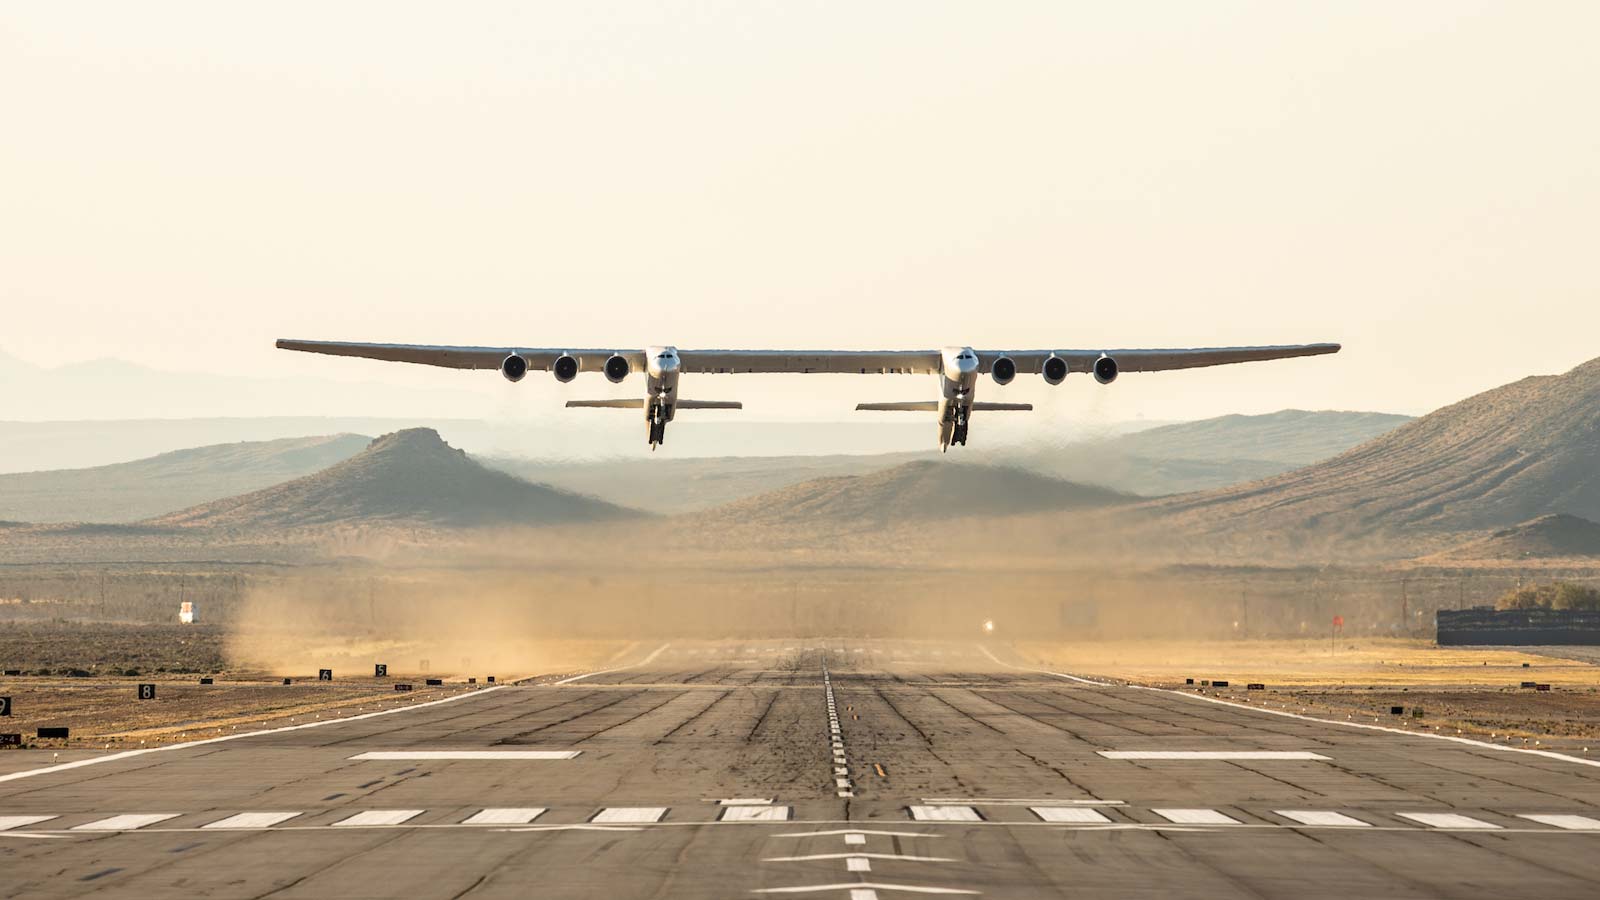 The Stratolaunch is built to launch rockets into space.